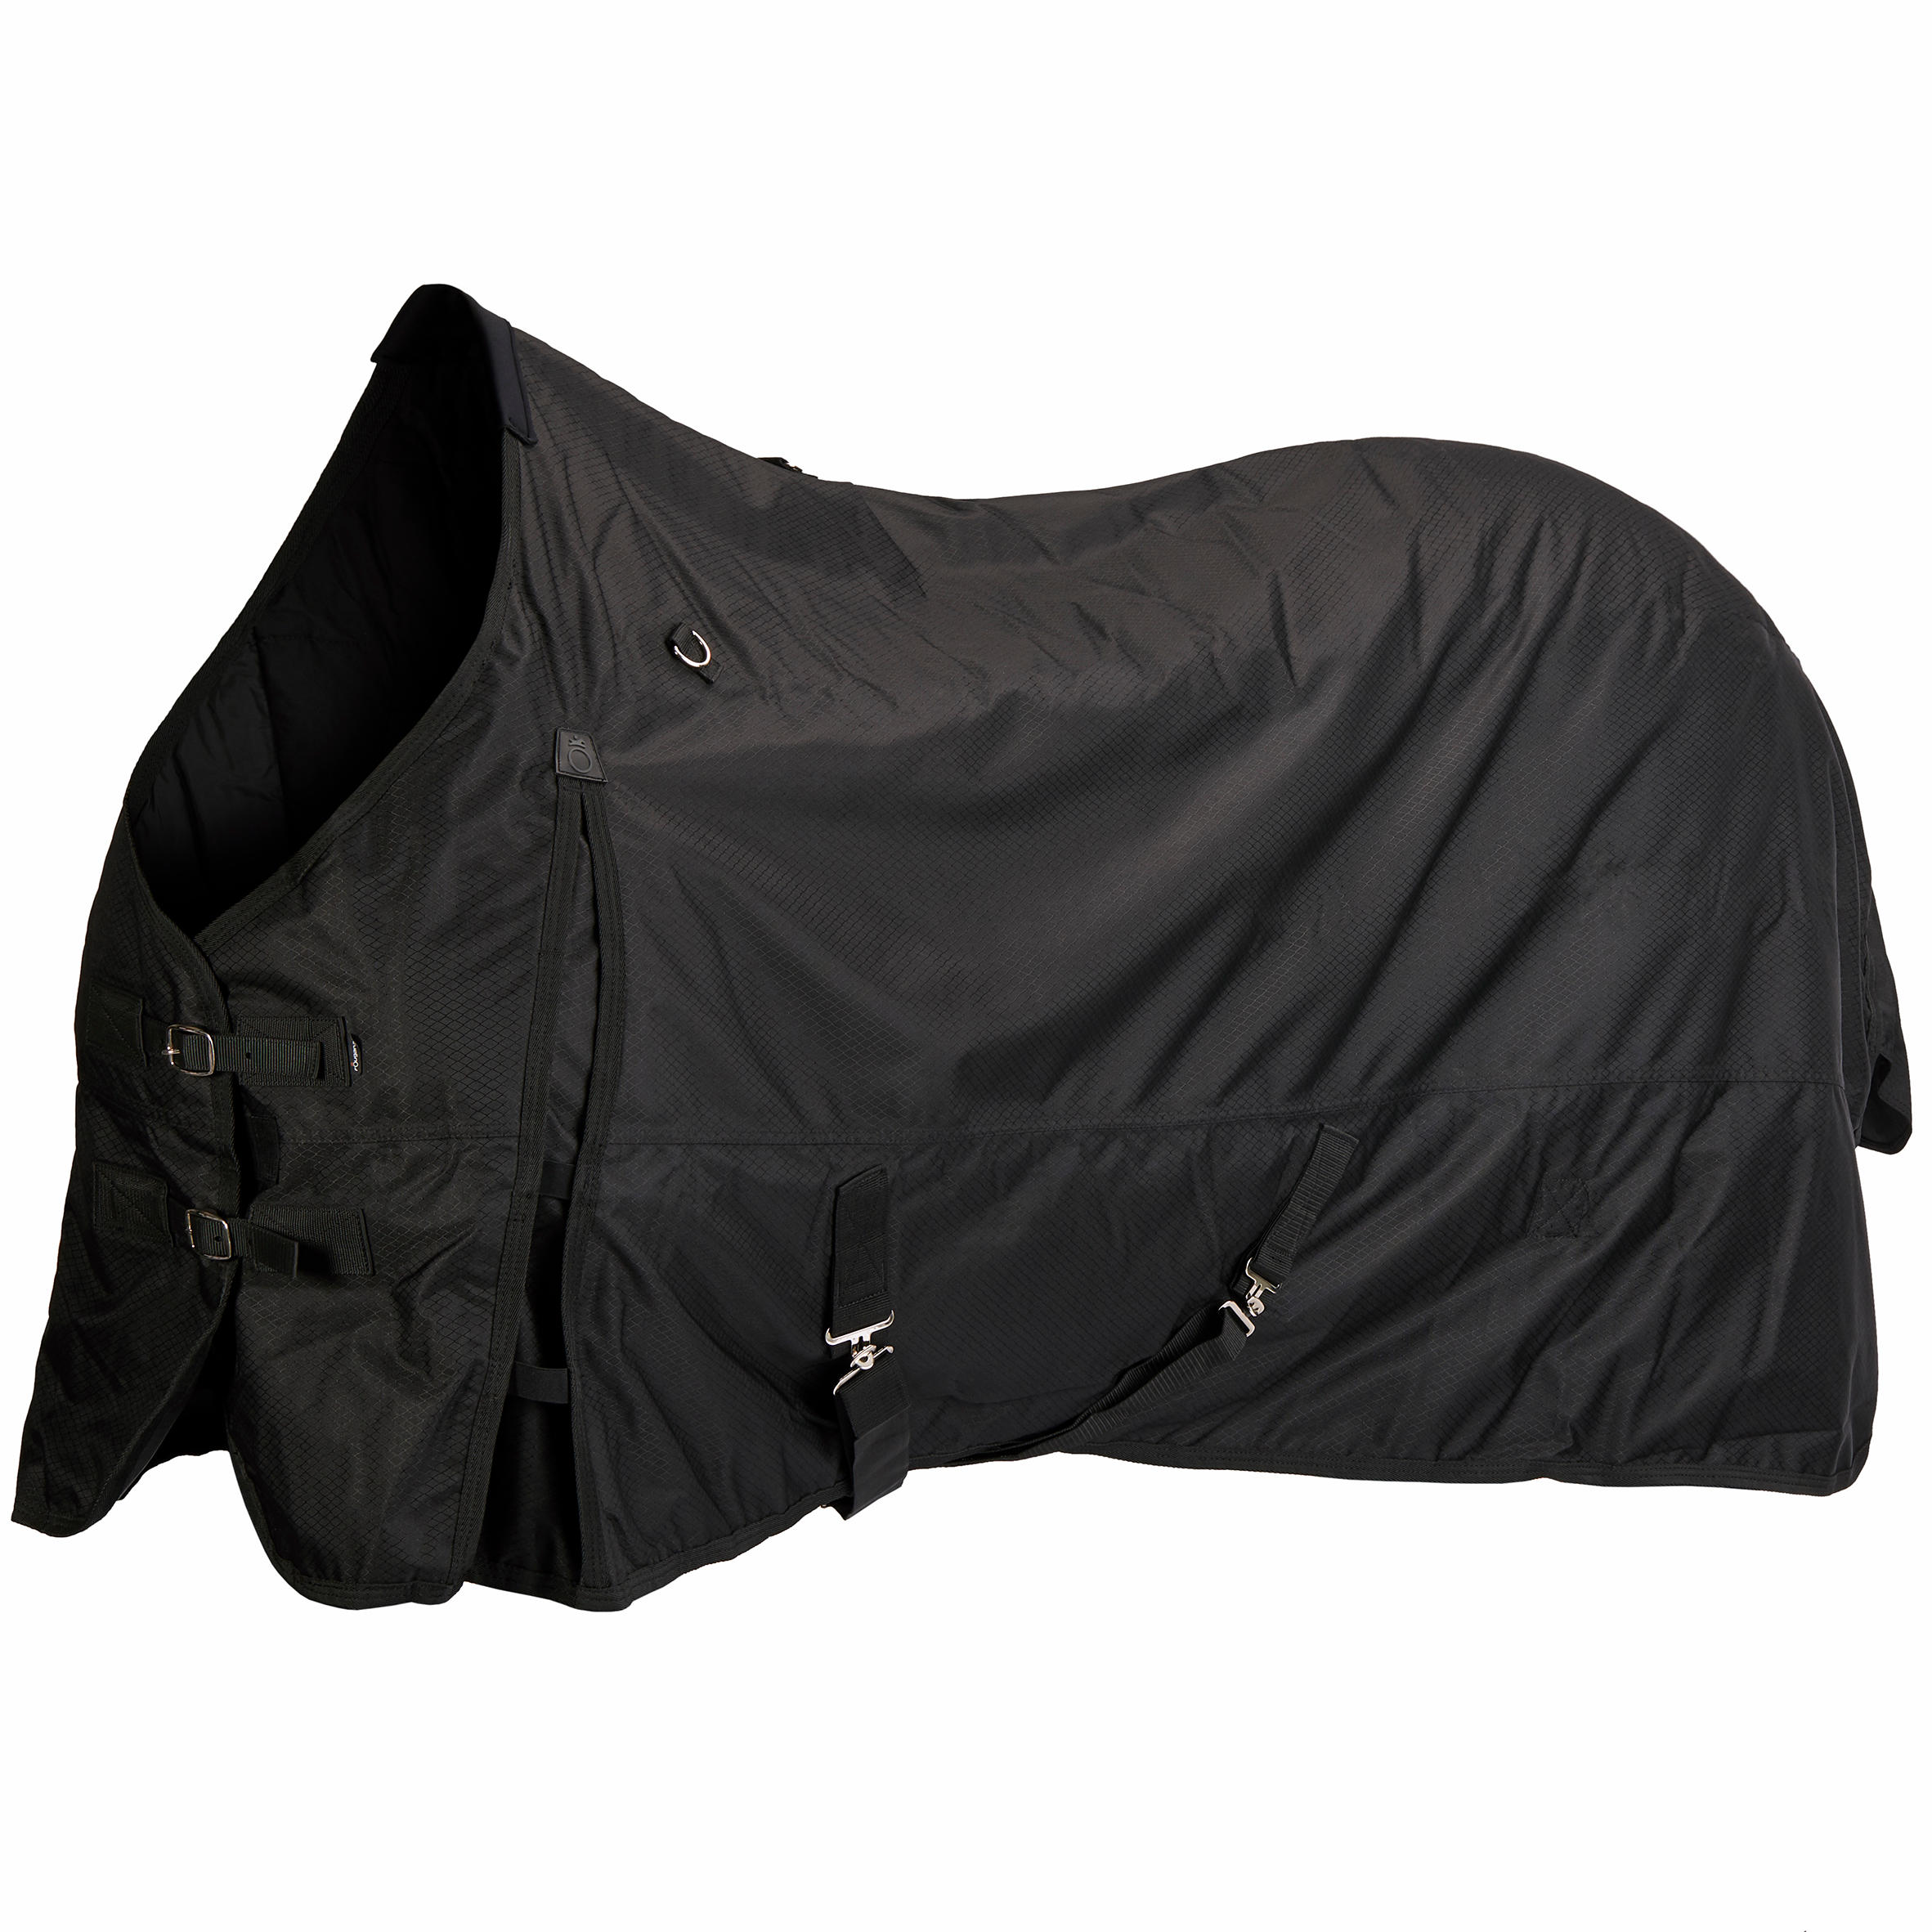 Allweather 200 600D Horse and Pony Waterproof Rug - Black 1/8